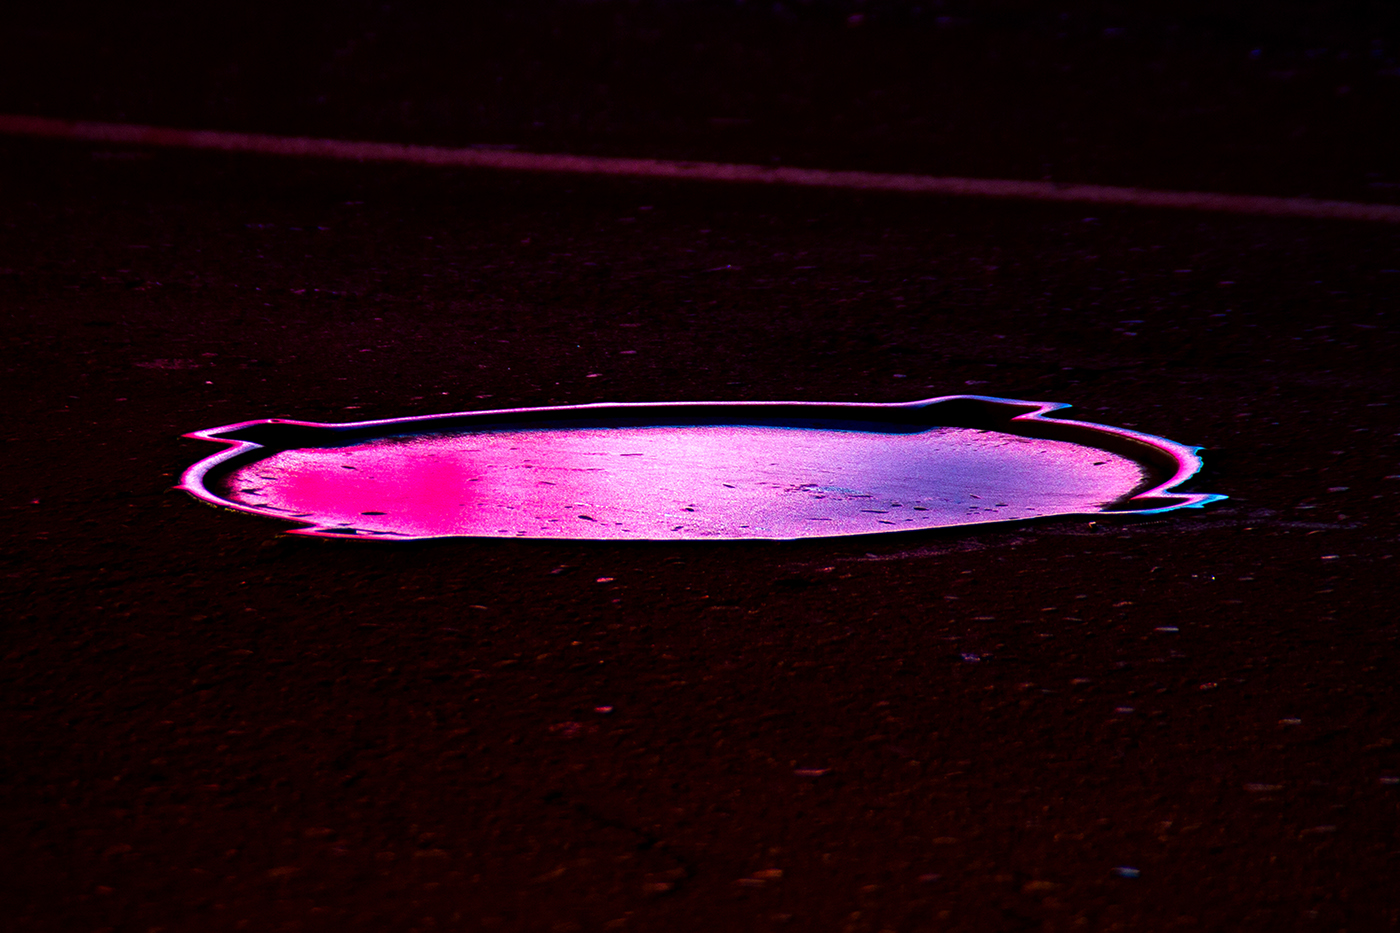 Flaws neon mirror night acid water lights colorful streets road